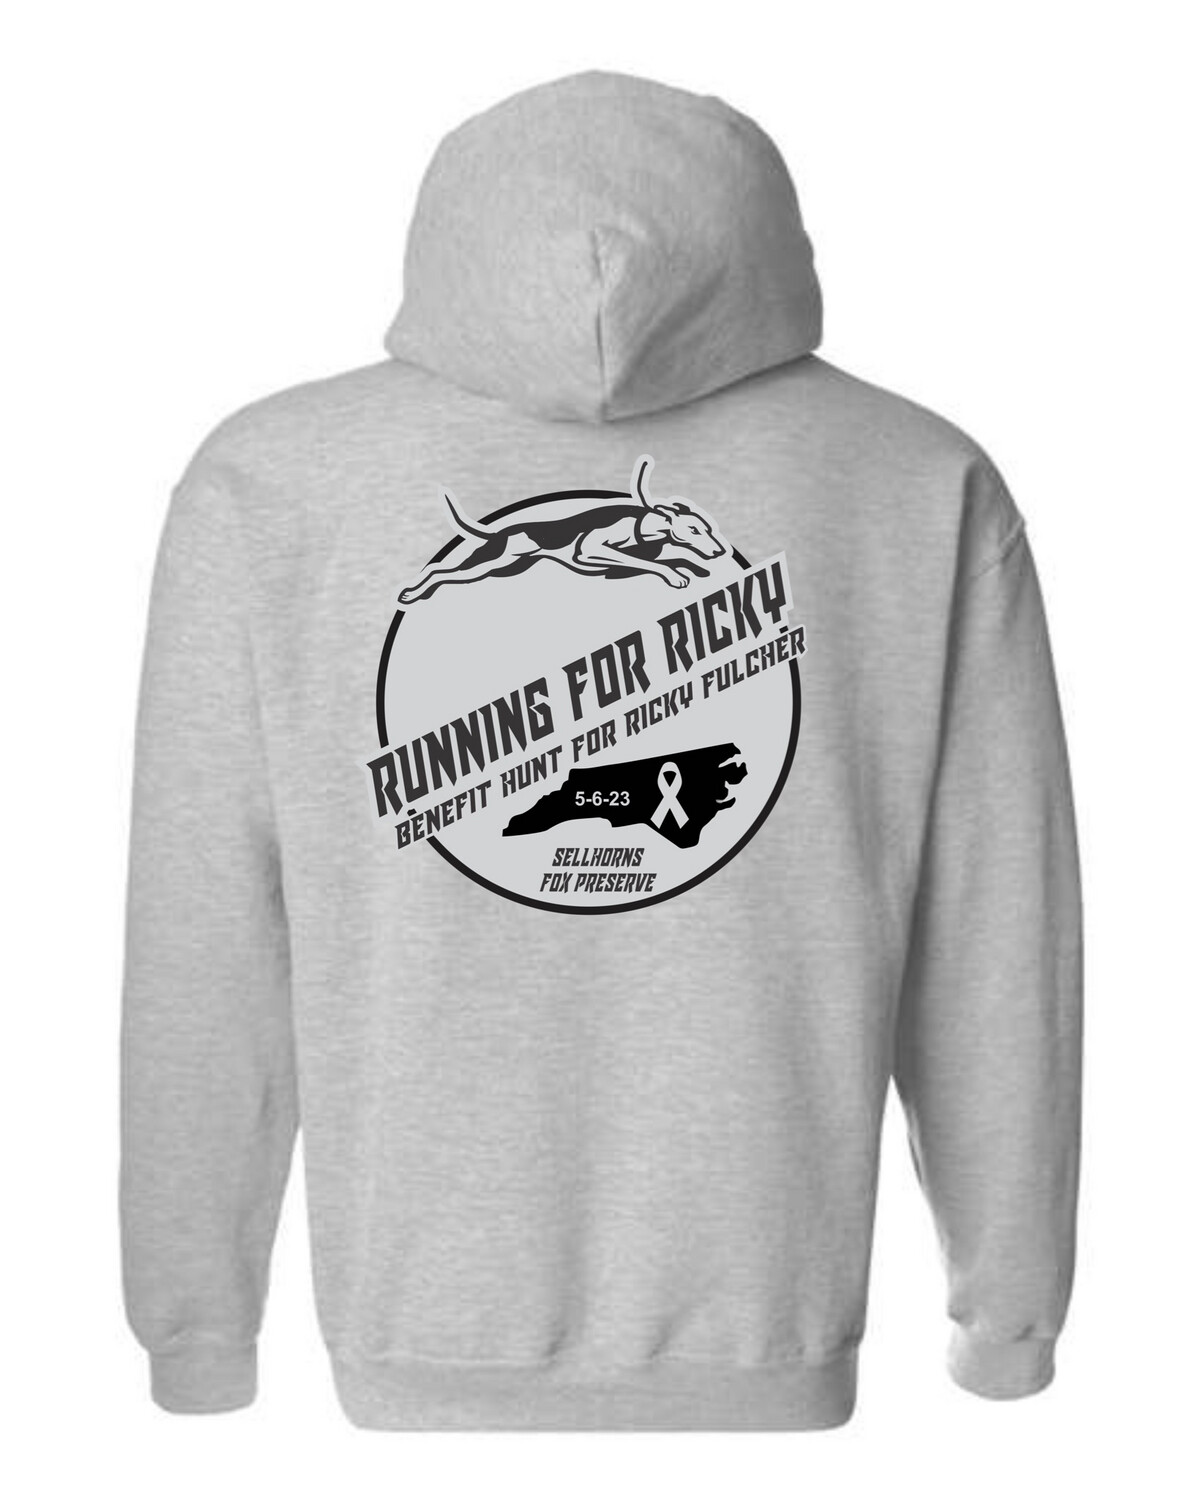 "Running For Ricky" Hoodie - Youth and Adult Sizes